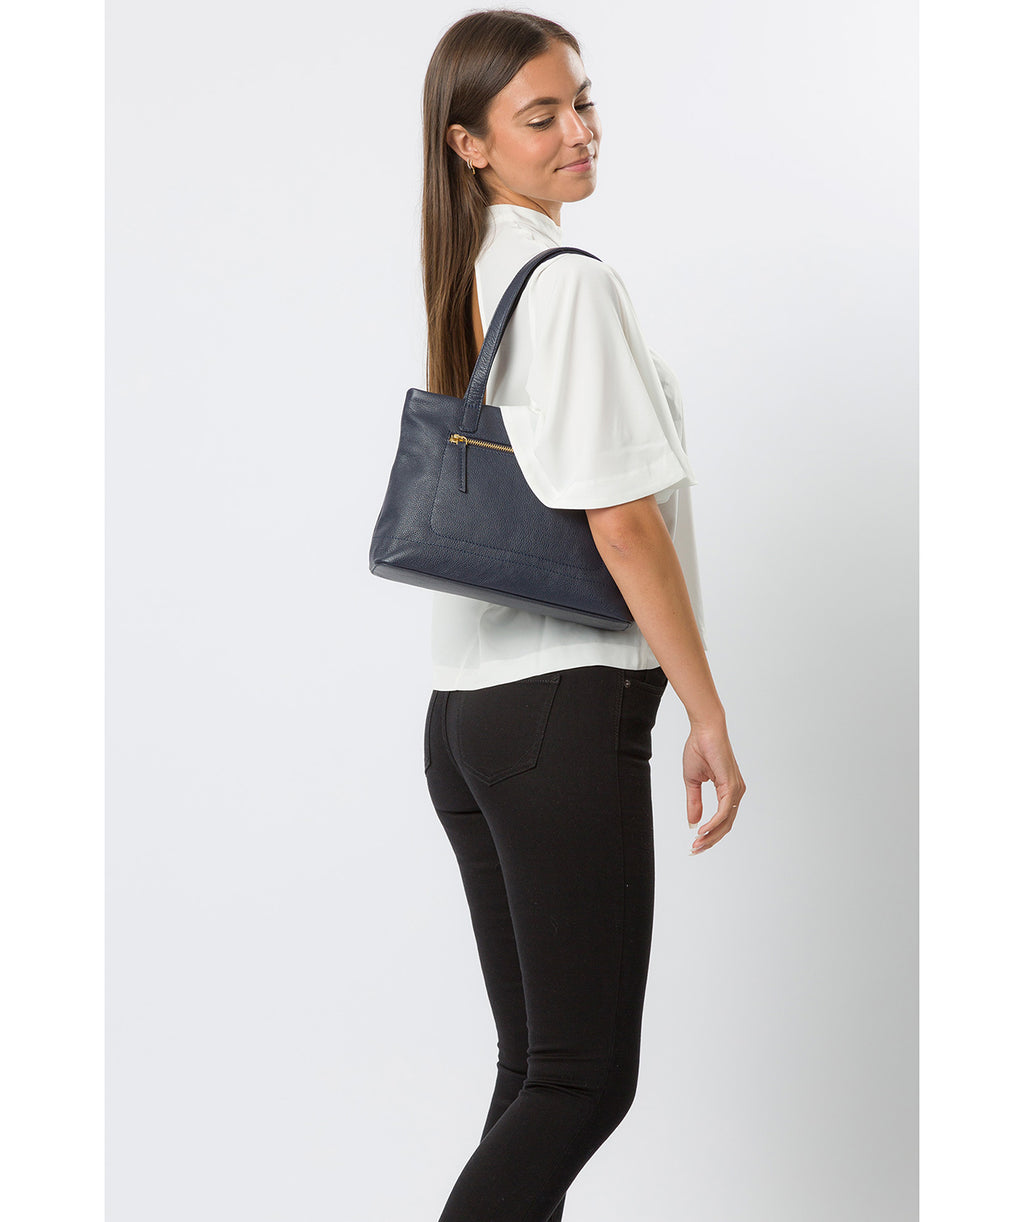 Blue Leather Handbag 'Adley' by Pure Luxuries – Pure Luxuries London